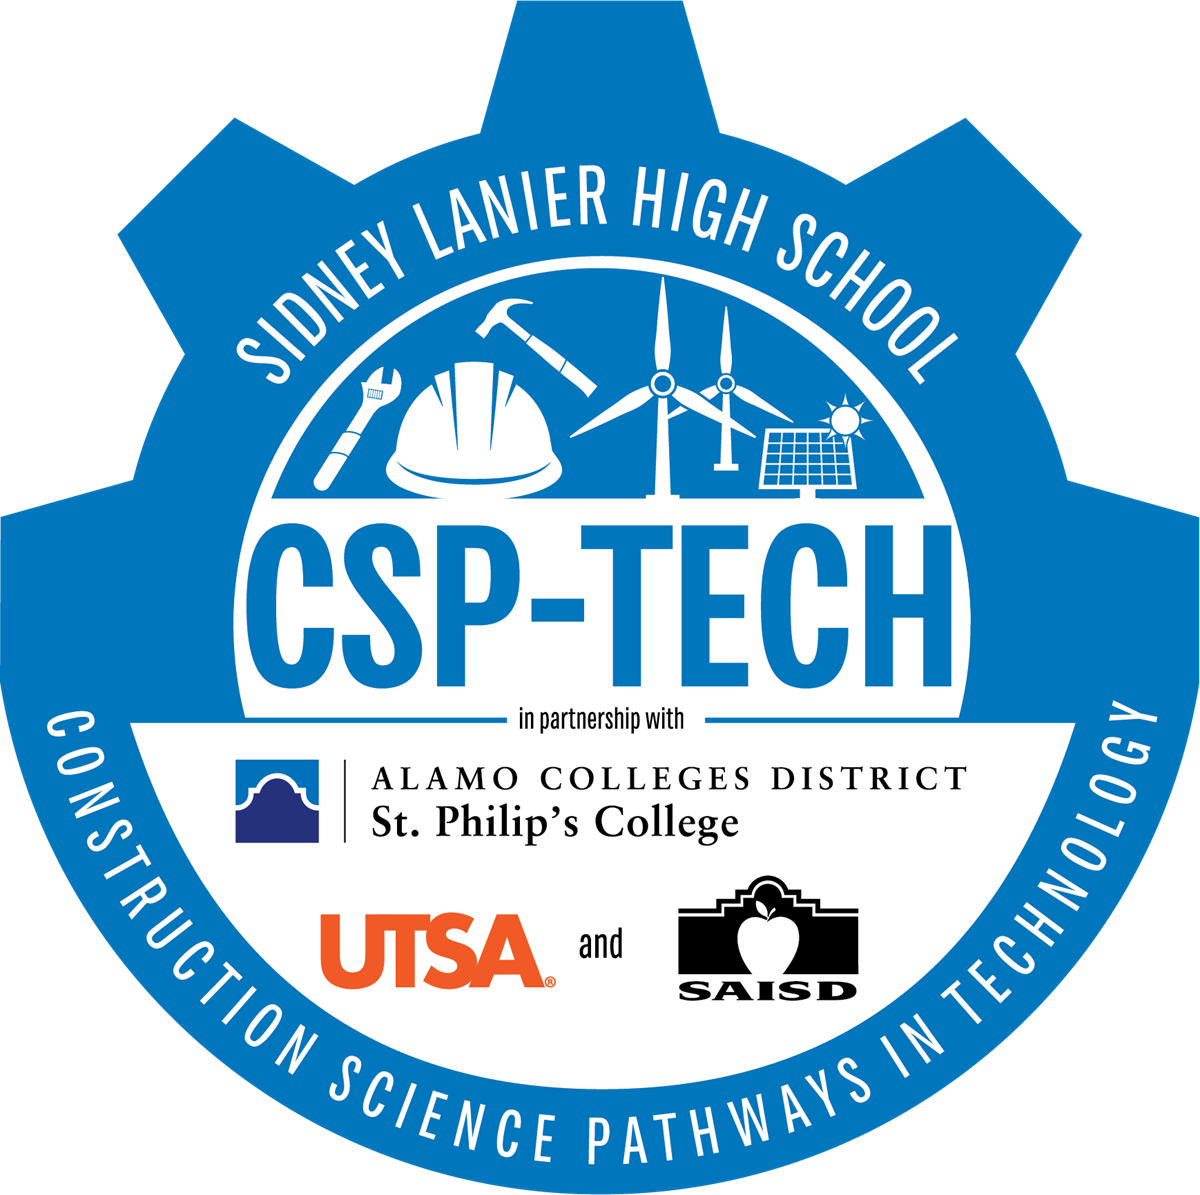 This image is the Construction Science Pathways in Technology P-Tech logo at Lanier High School 